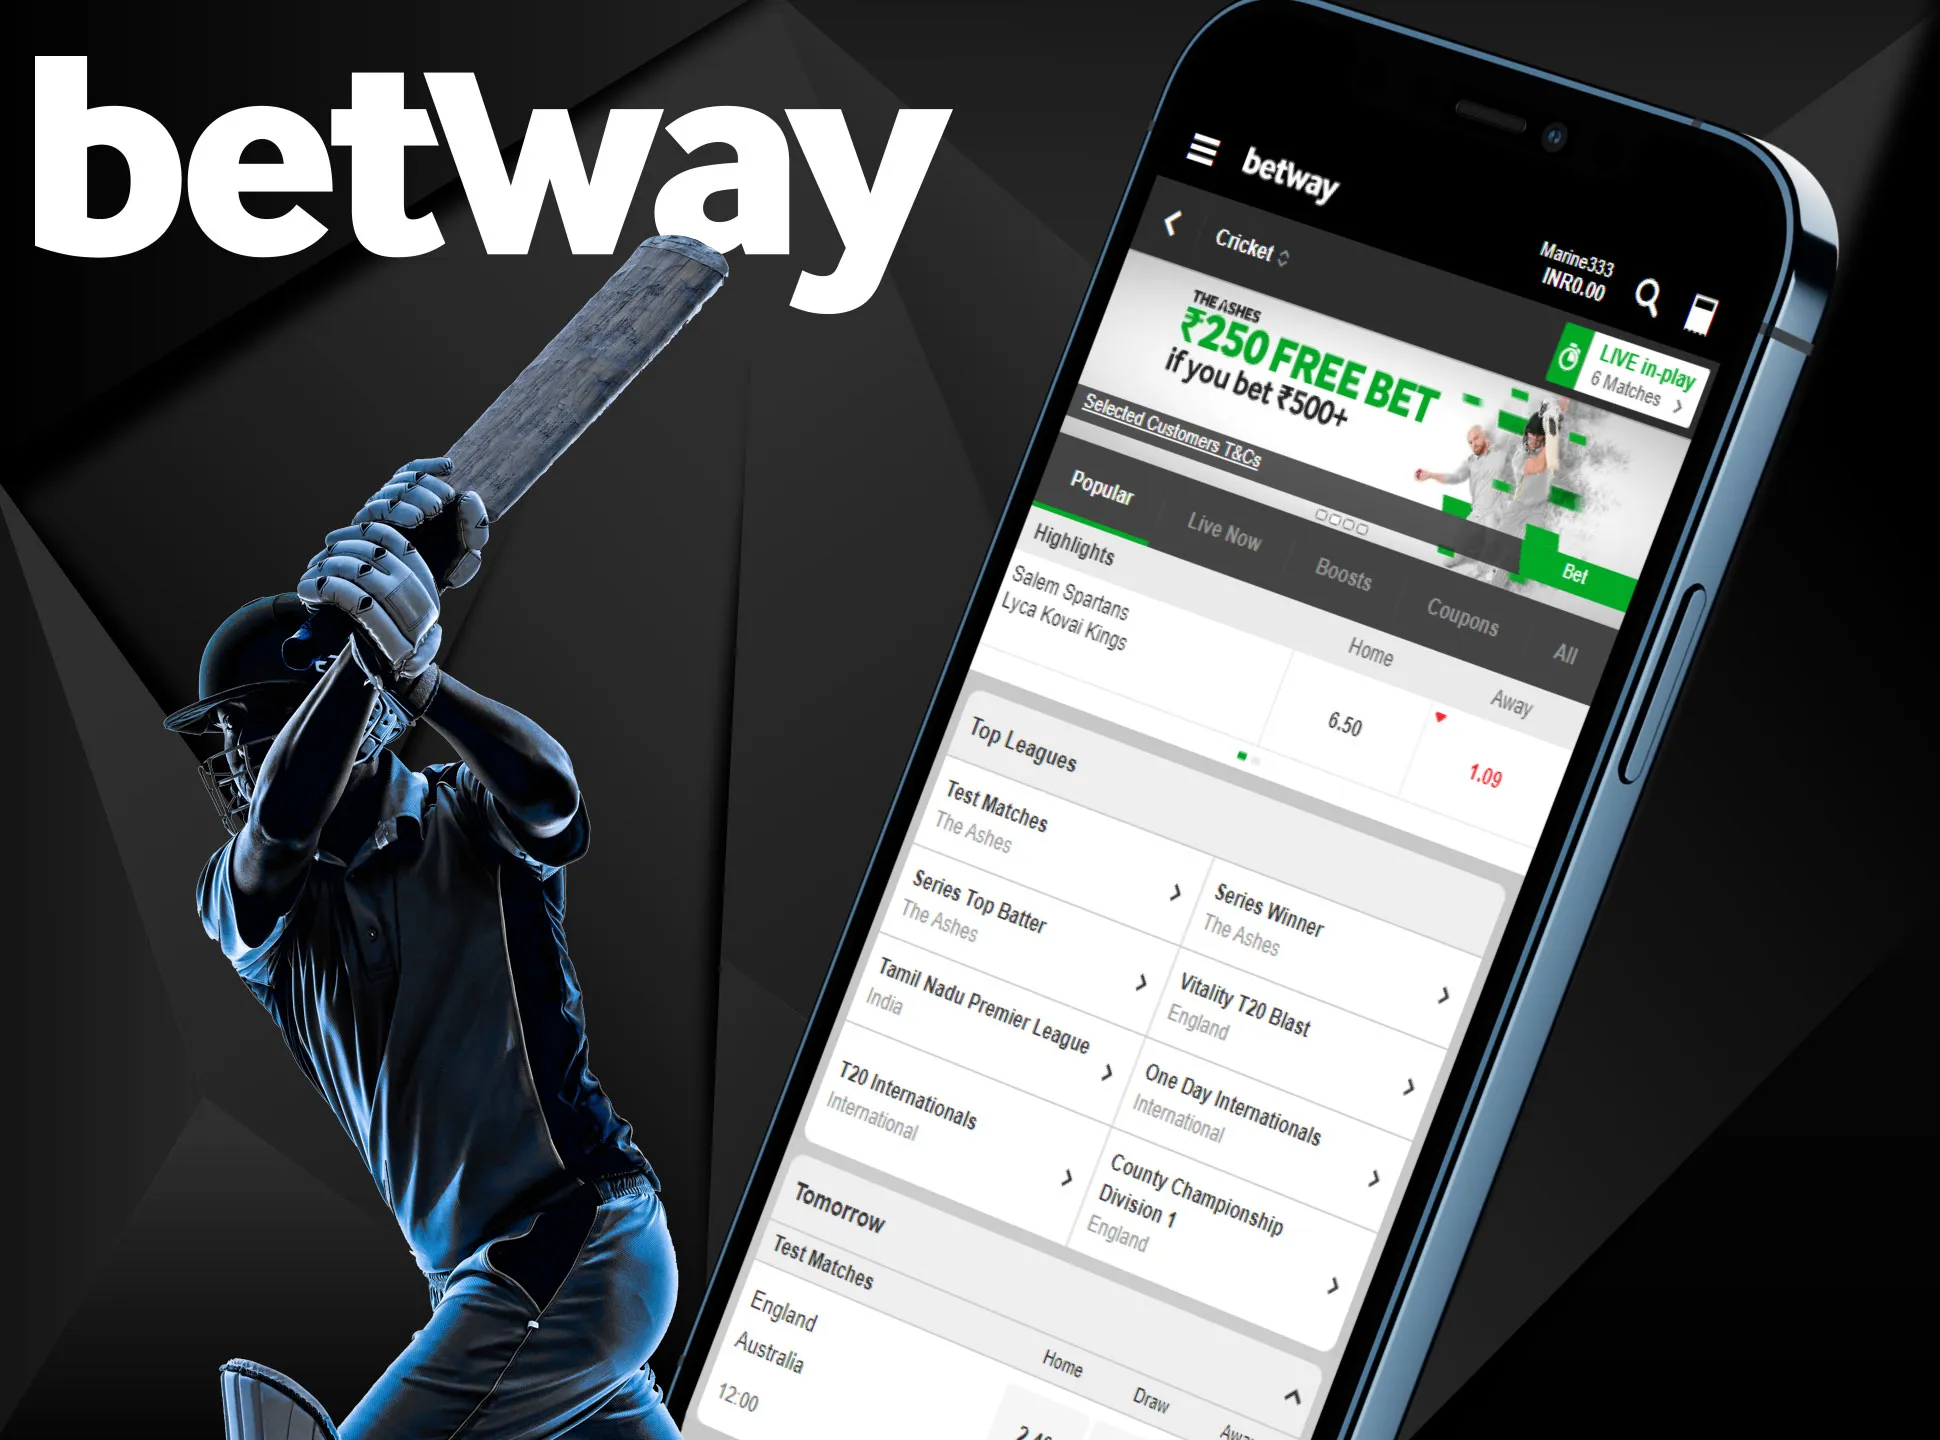 Betway app has various payment methods for betting on cash.